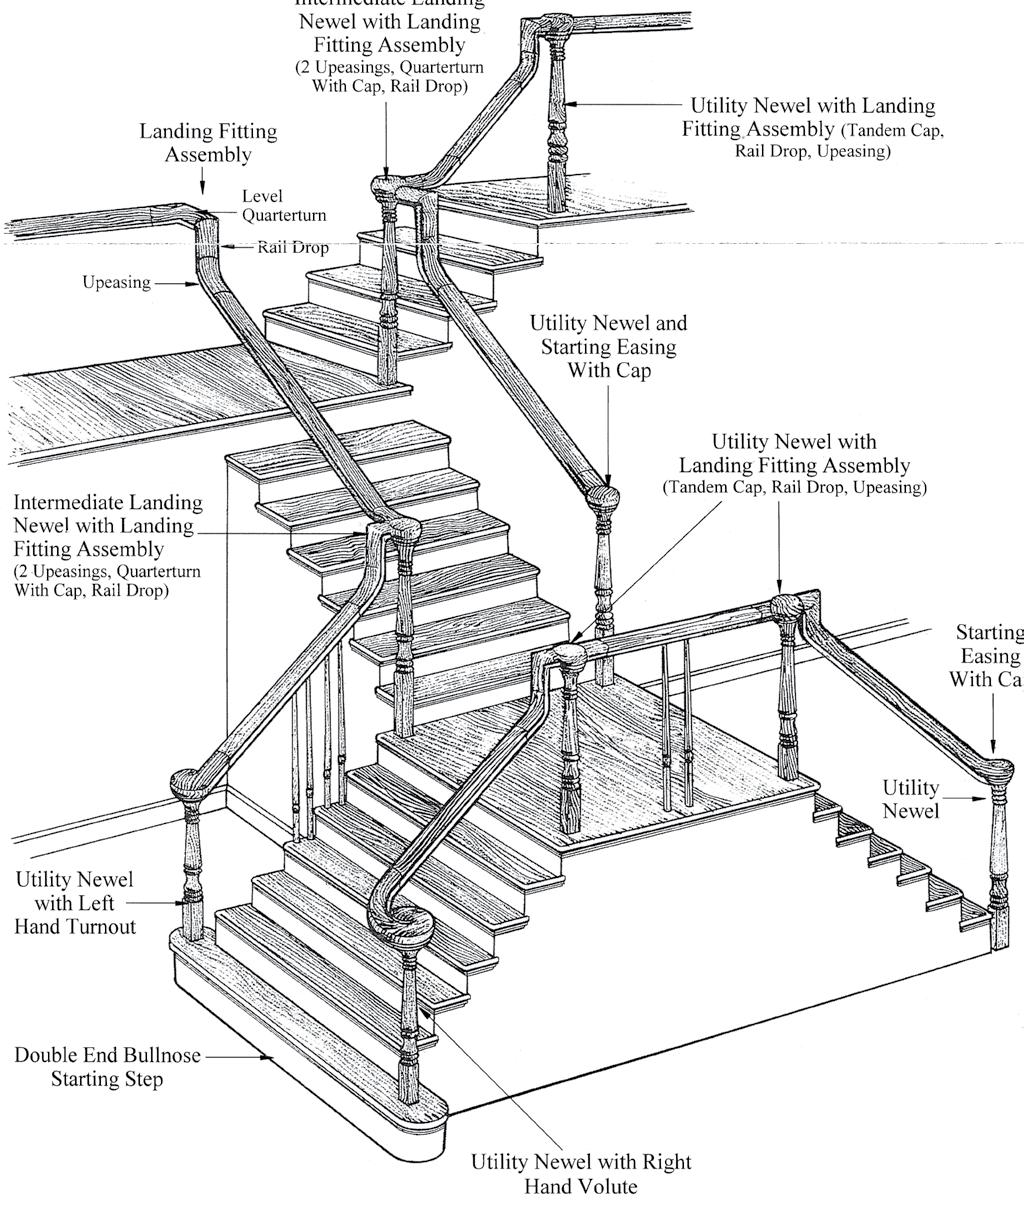 Over the post UPEASING APPLICATIONS OF AN OVER THE POST SYSTEM INTERMEDIATE LANDING NEWEL WITH LANDING FITTING ASSEMBLY (2 Upeasings, Quarterturn With Cap, Rail Drop) LANDING FITTING ASSEMBLY LEVEL